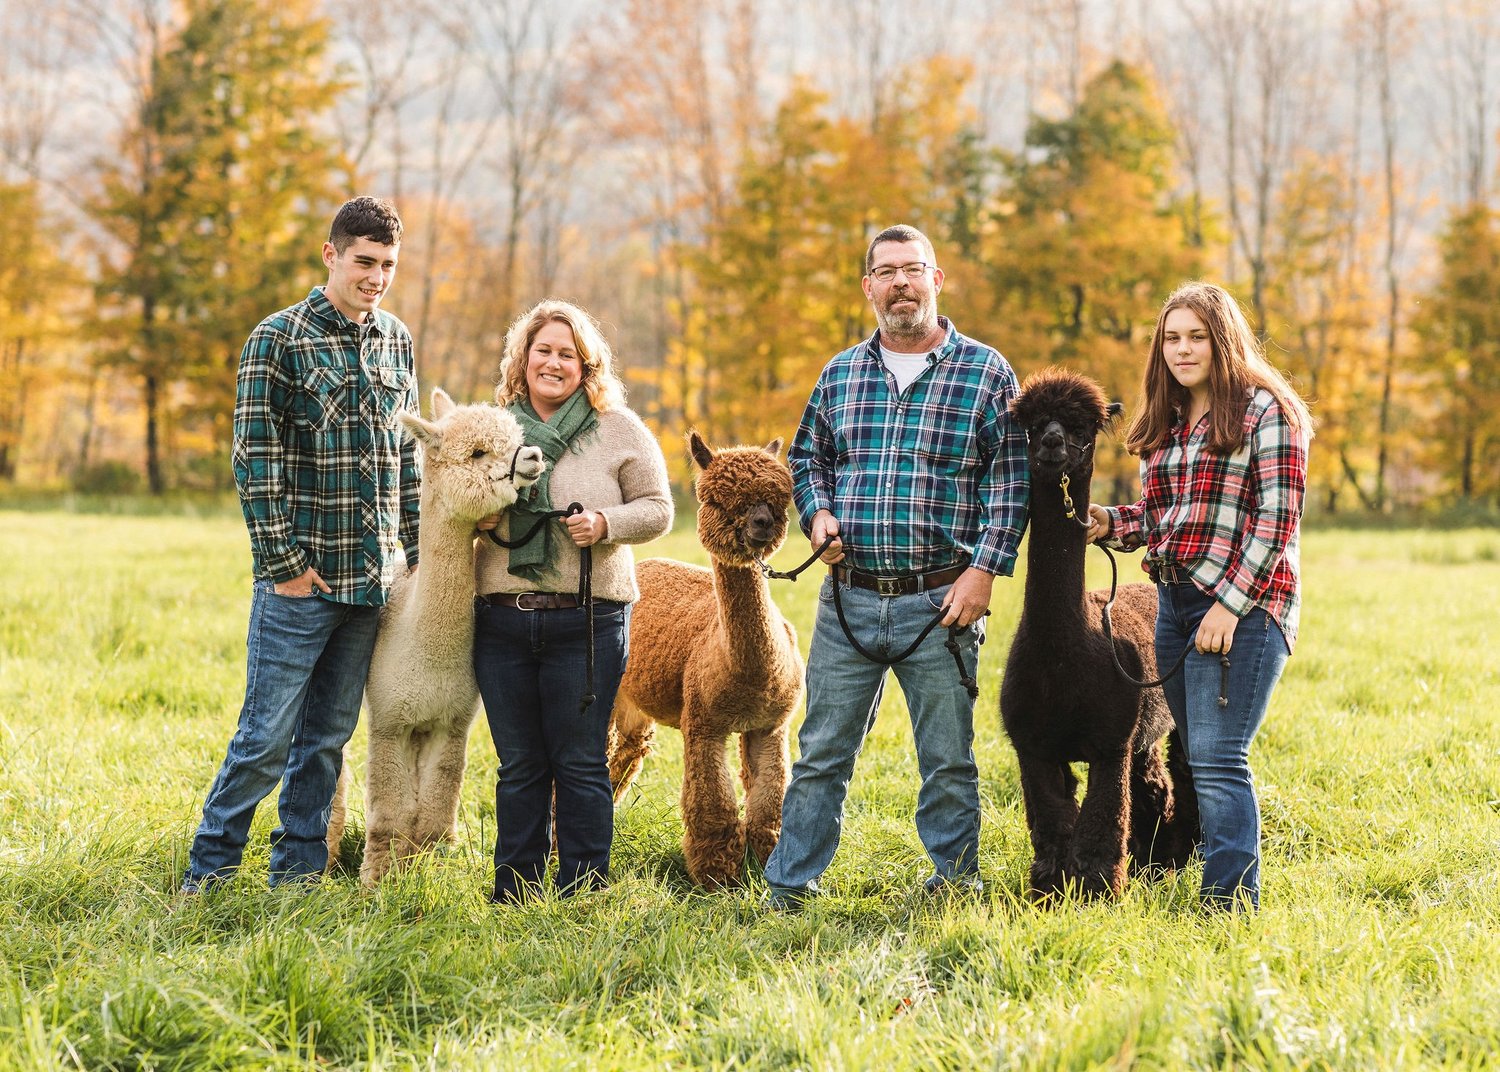 Buck Brook Alpacas was given the STAR award for business achievement by the SCVA.